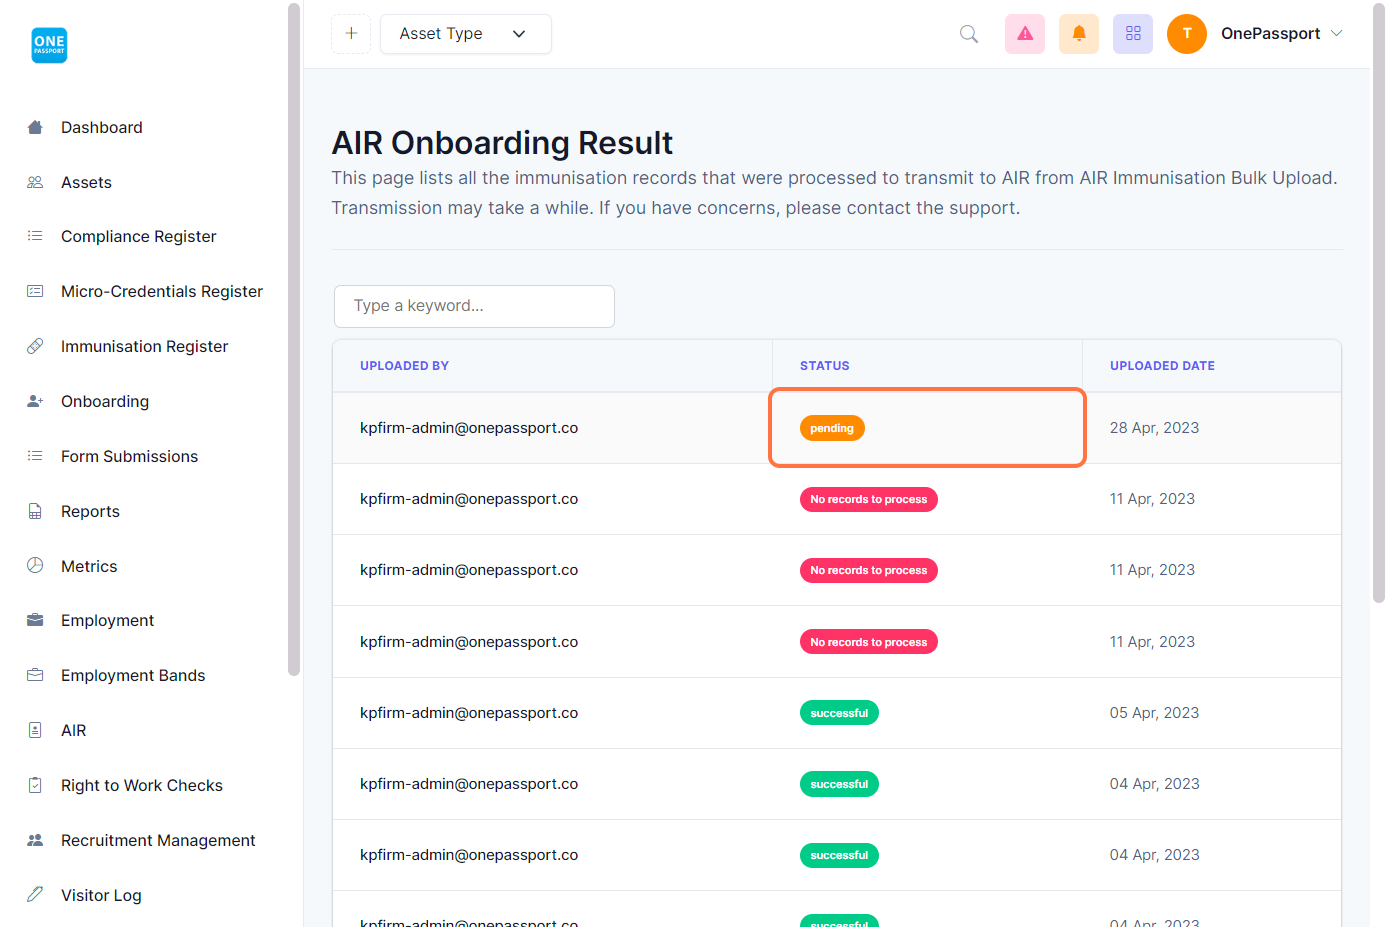 You will be redirected to the AIR Onboarding Result page. It will be on "Pending" Status but will eventually turn to Successful once it is processed by the system.